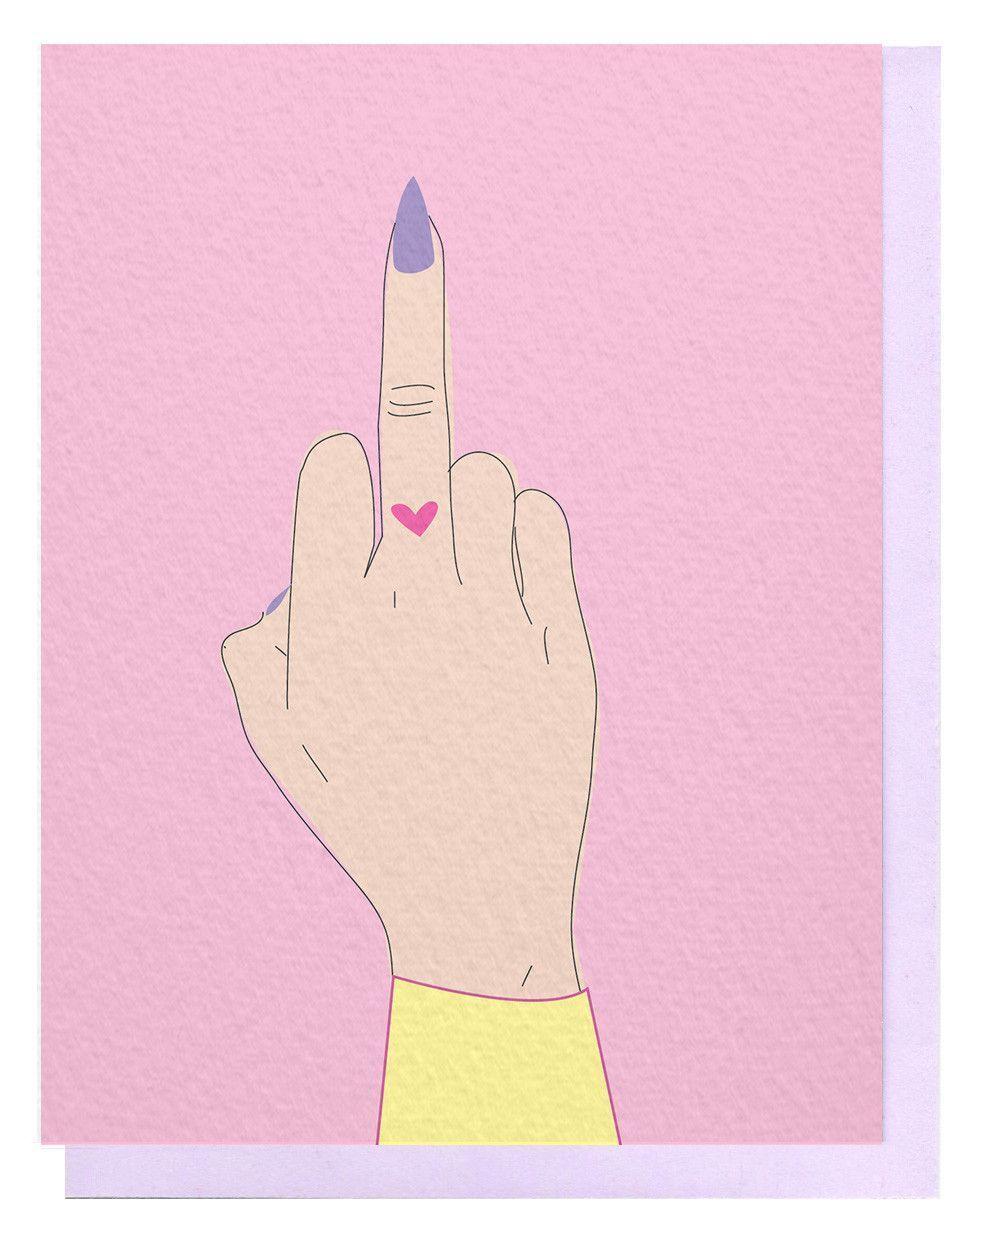 The Middle Finger Wallpapers Wallpaper Cave Fashion with a middle finger | gq. middle finger wallpapers wallpaper cave